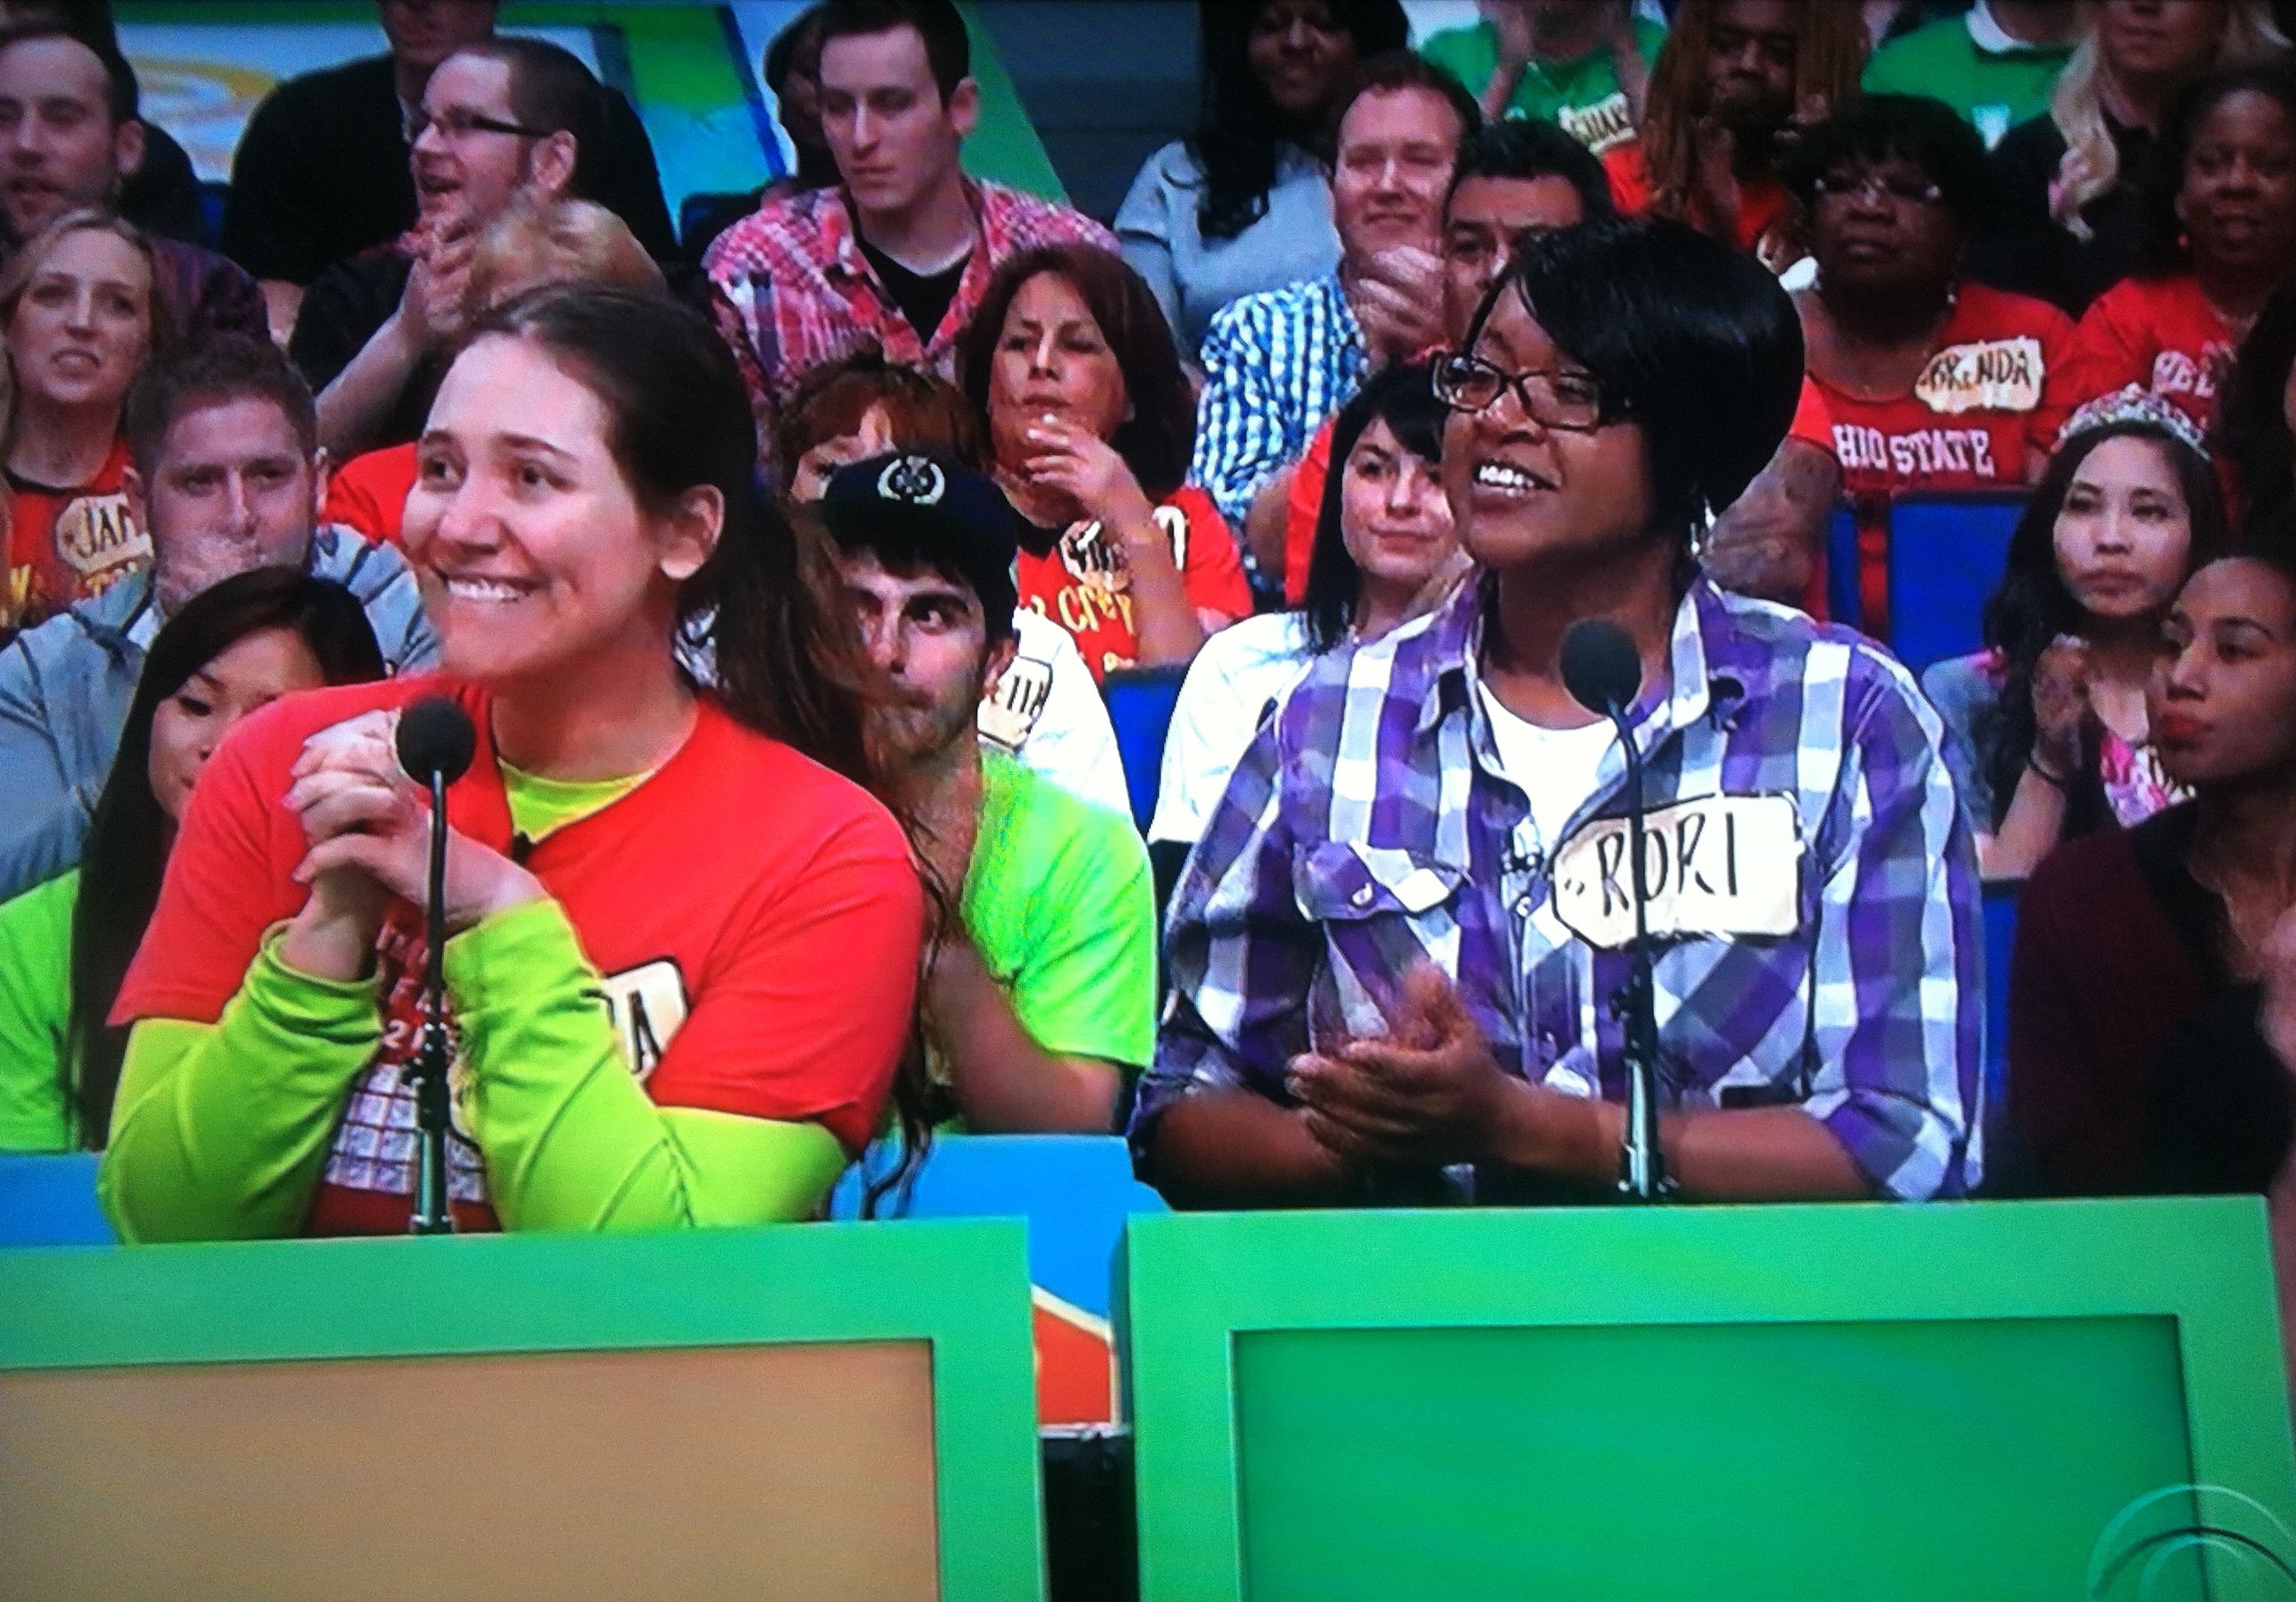 Aurora De Lucia in contestant's row on The Price is Right, looking like she really wants those camcorders